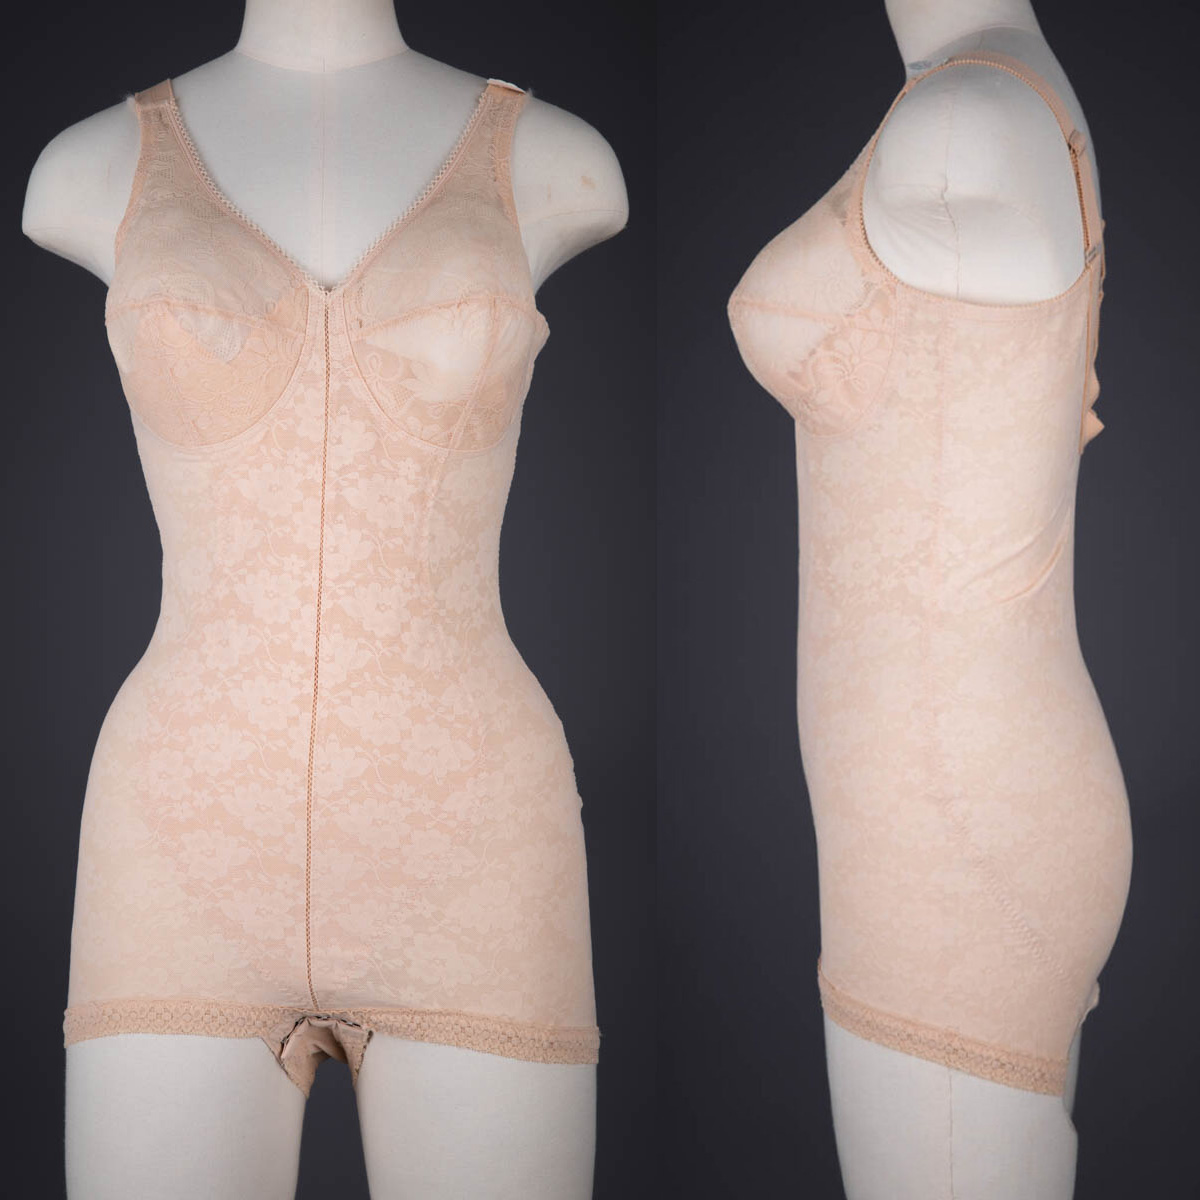 New to our digital collection, this shaping bodysuit, from French brand Chantelle, was designed to provide all-over support and help create the naturally slender figure that was fashionable in the 1960s. underpinningsmuseum.com/museum-collect…